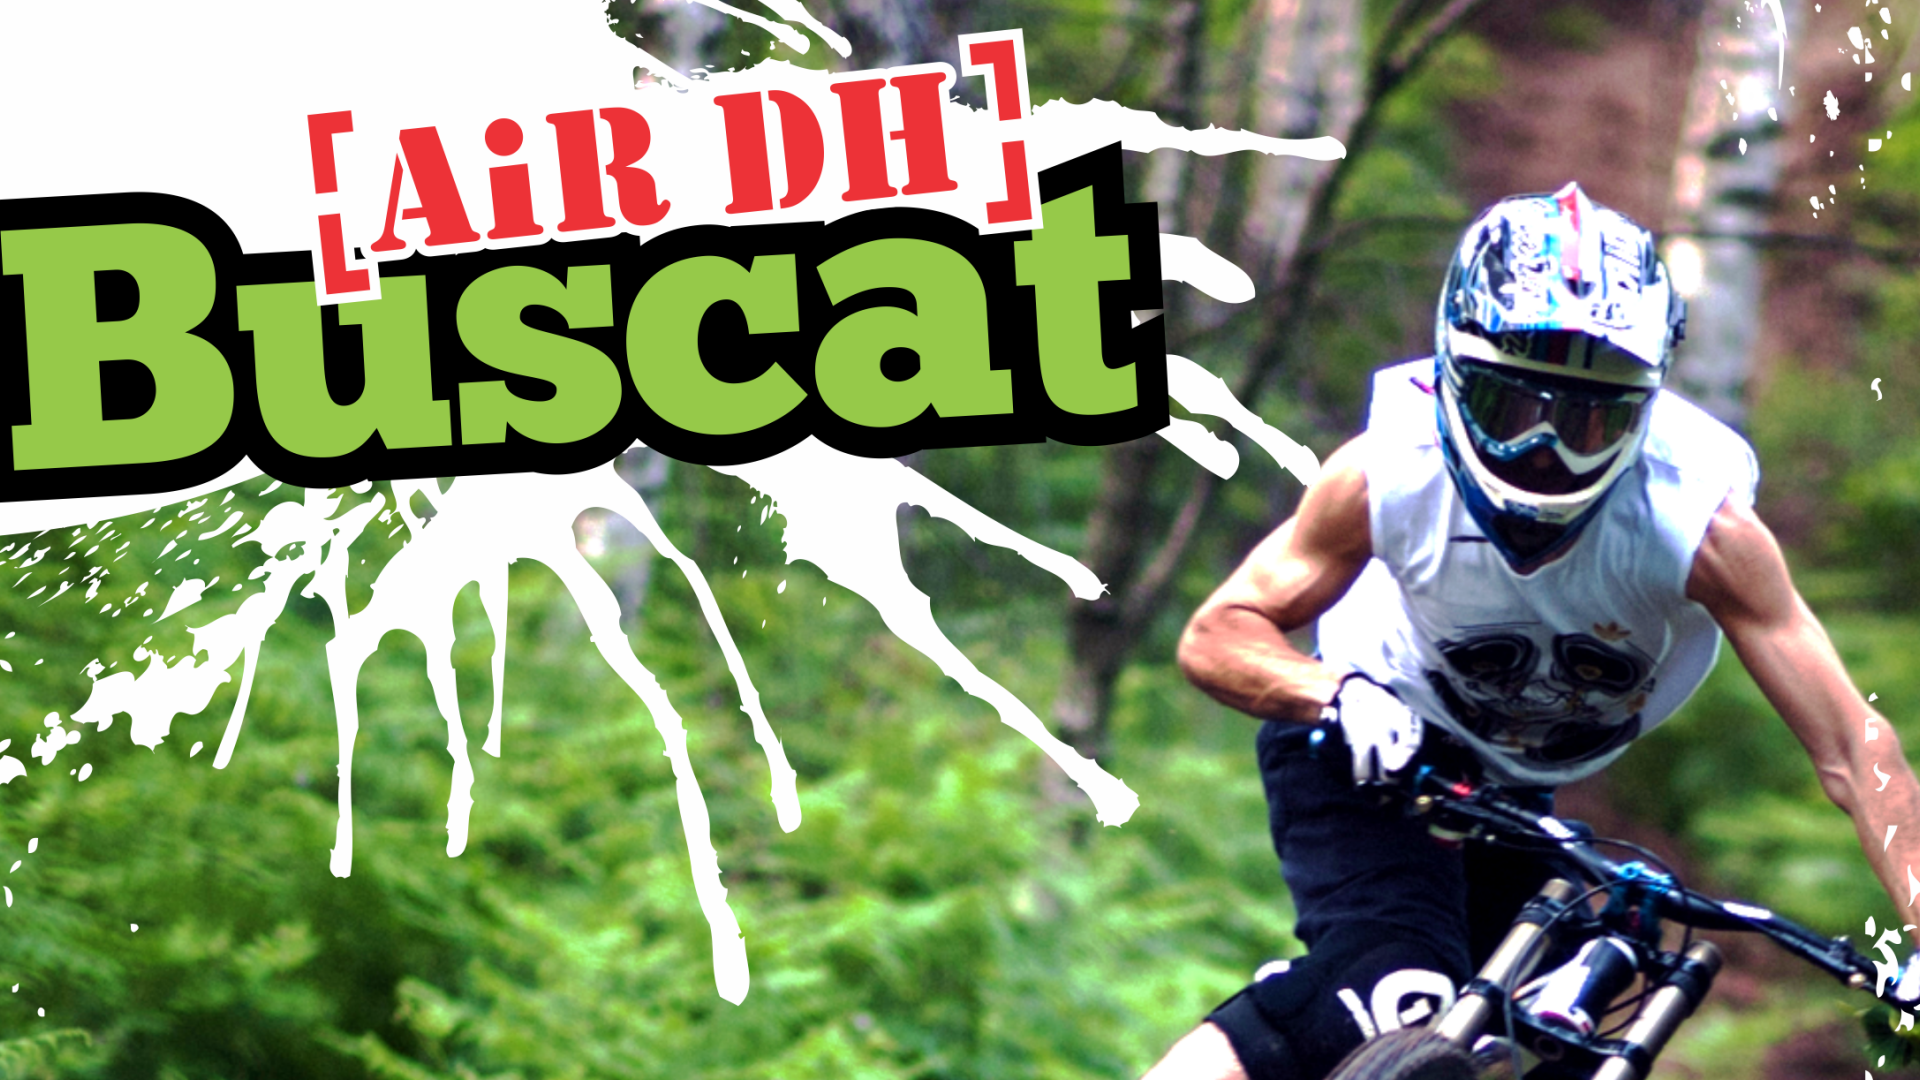 Buscat downhill